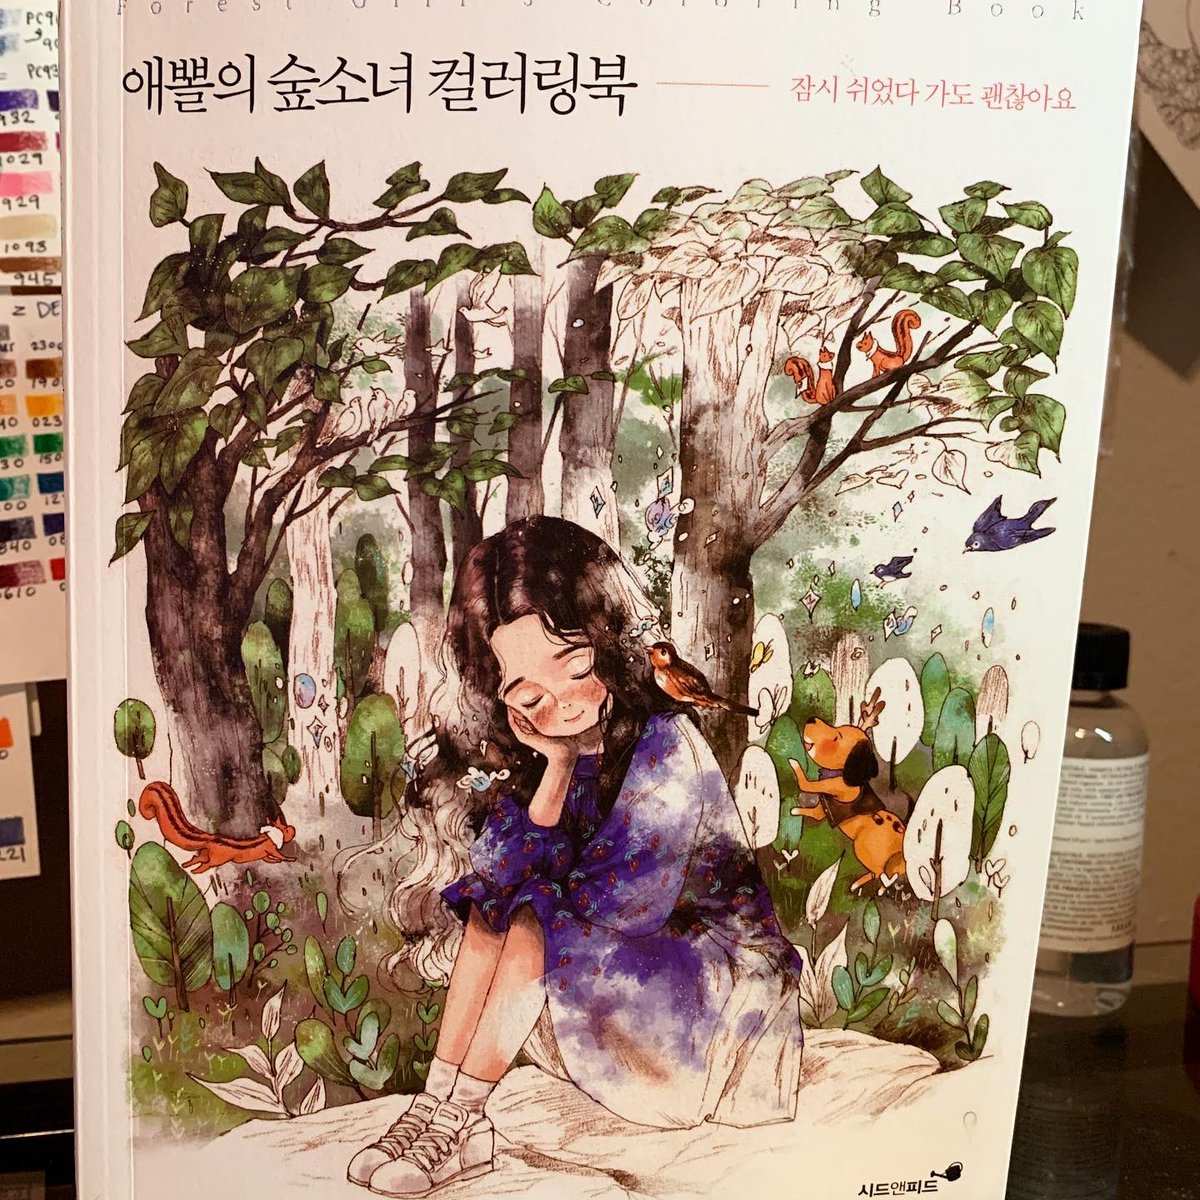 Very cute #art had a little trouble getting inspired 😔 thanks to the amazing #aeppol for the art! 
From the #coloringbook #forestgirls 
#forestgirlscoloringbook #coloring #coloringsforedits #coloringforadults #coloringtherapy #colormyhoard #artoftheday #arte #coloringpencils